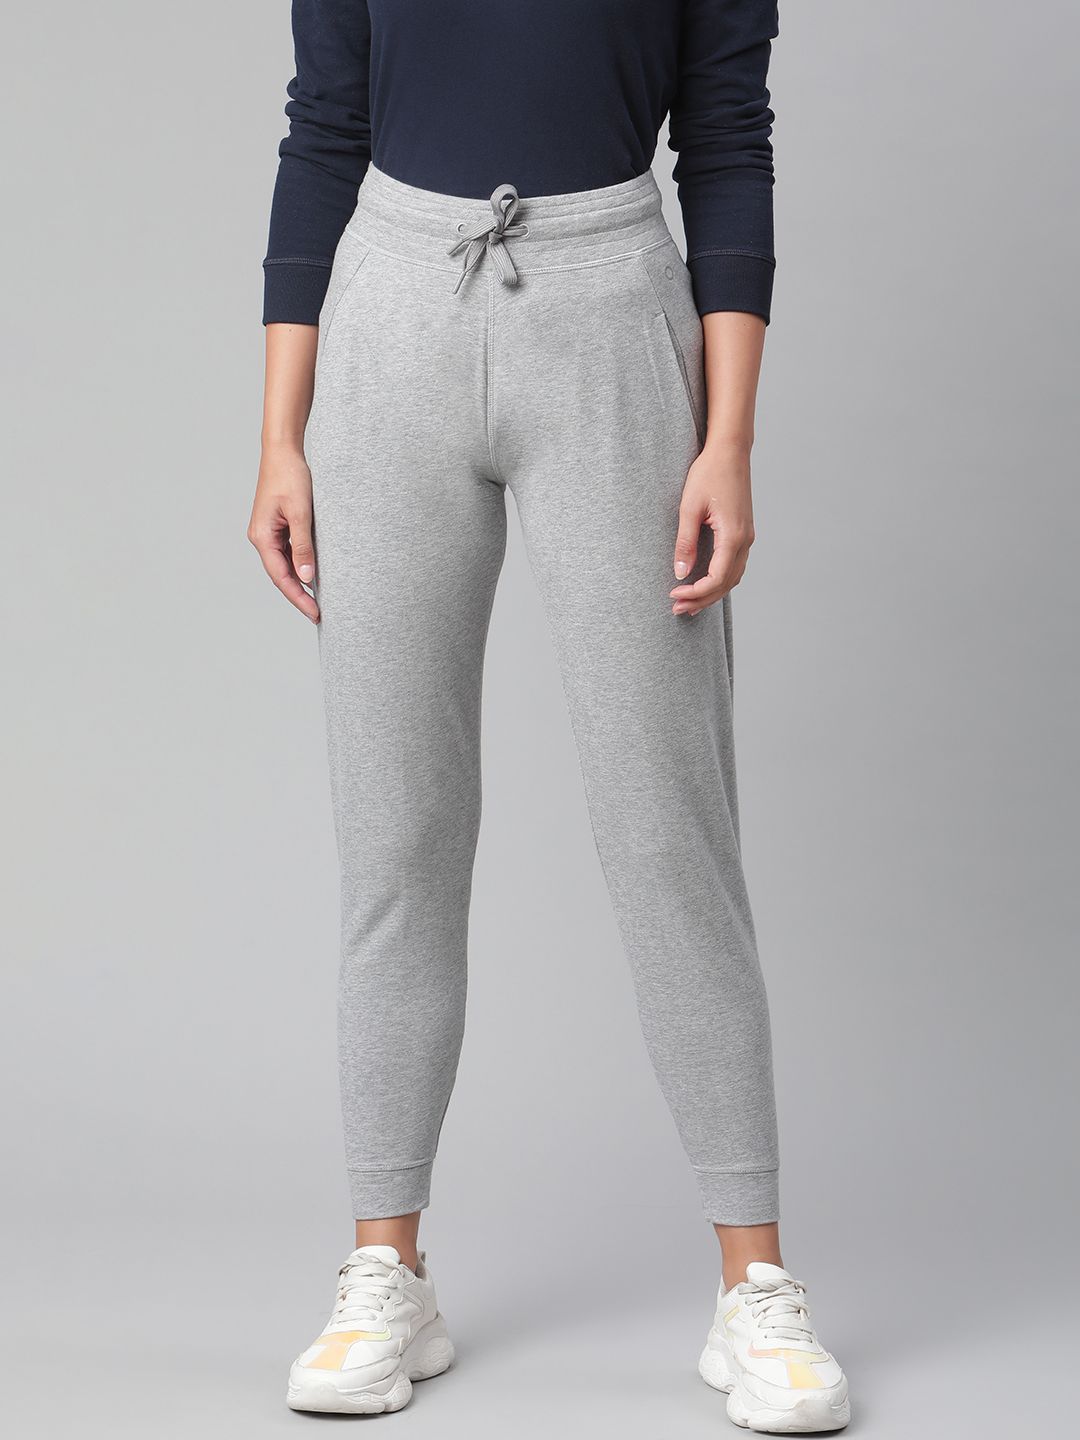 Marks & Spencer Women Grey Melange Solid Joggers Price in India